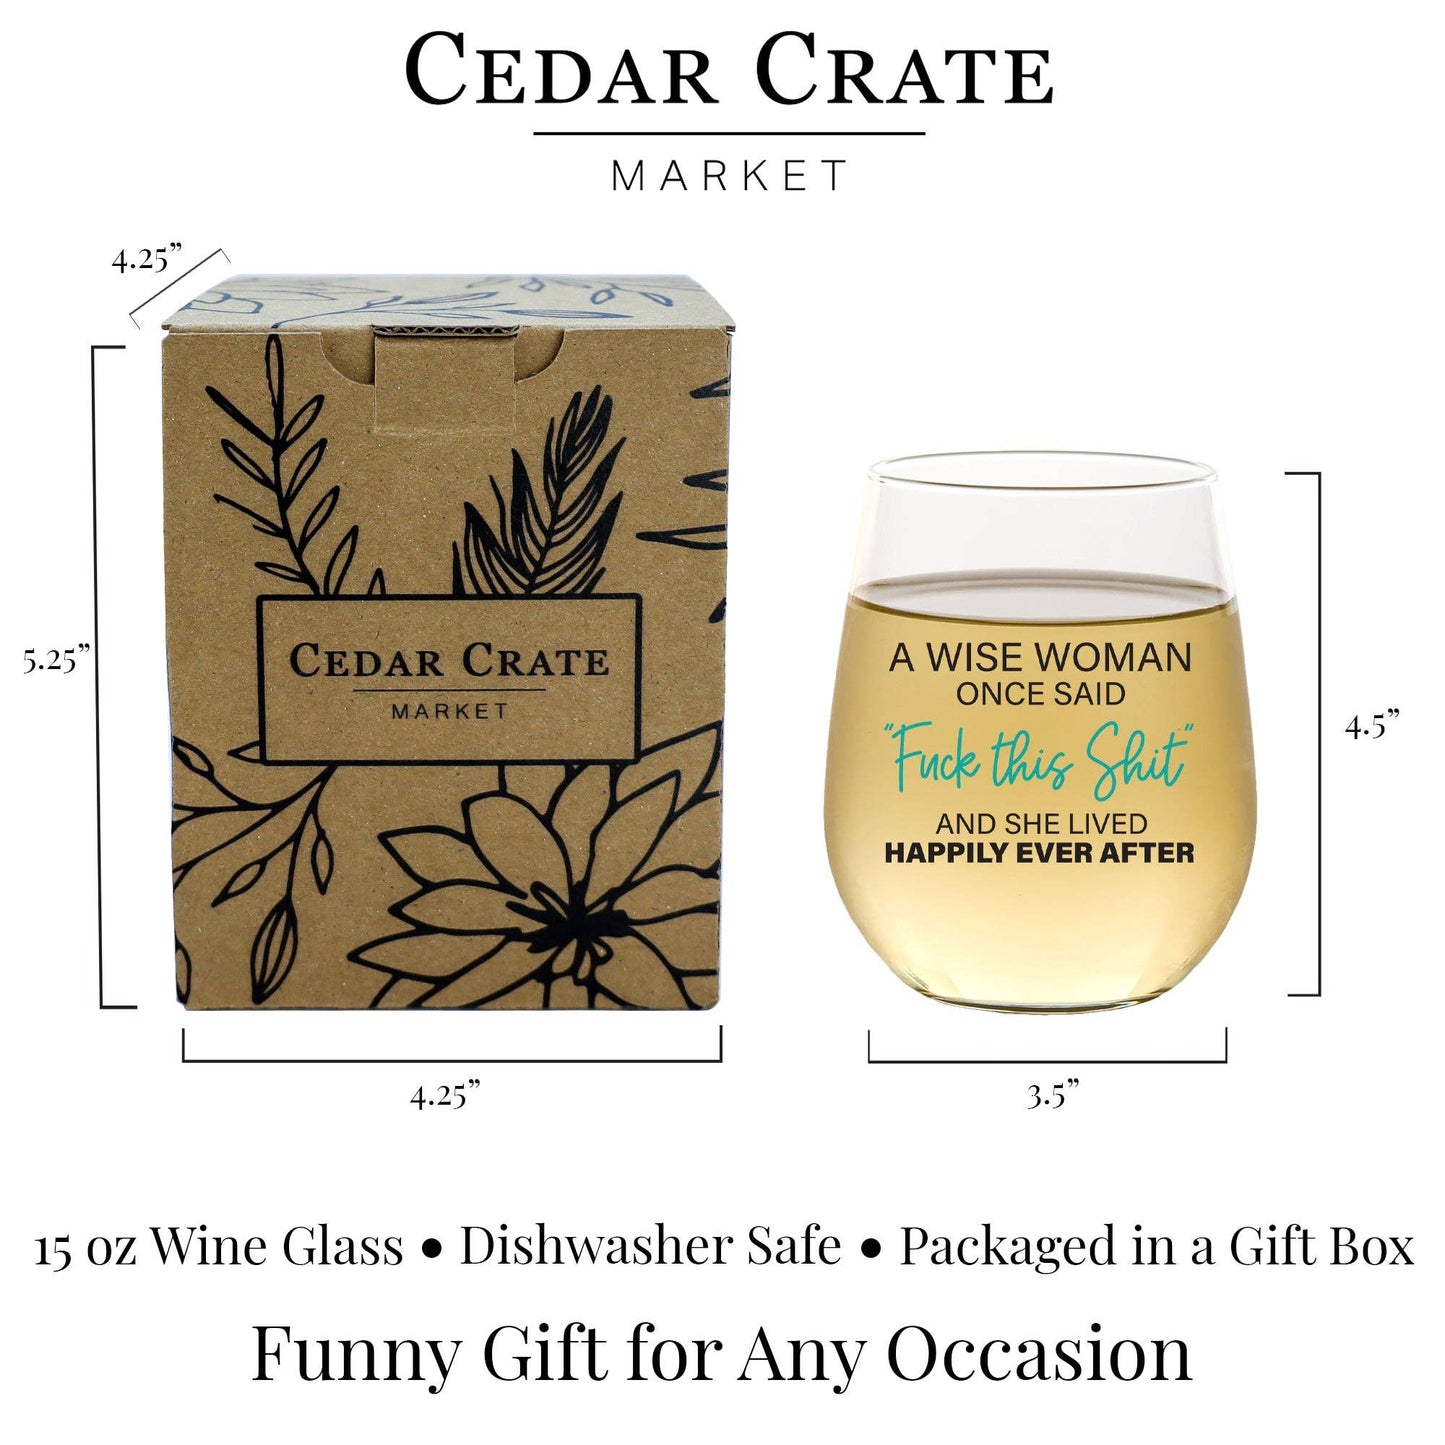 A Wise Woman Once Said 15oz Wine Glass Core Cedar Crate Market